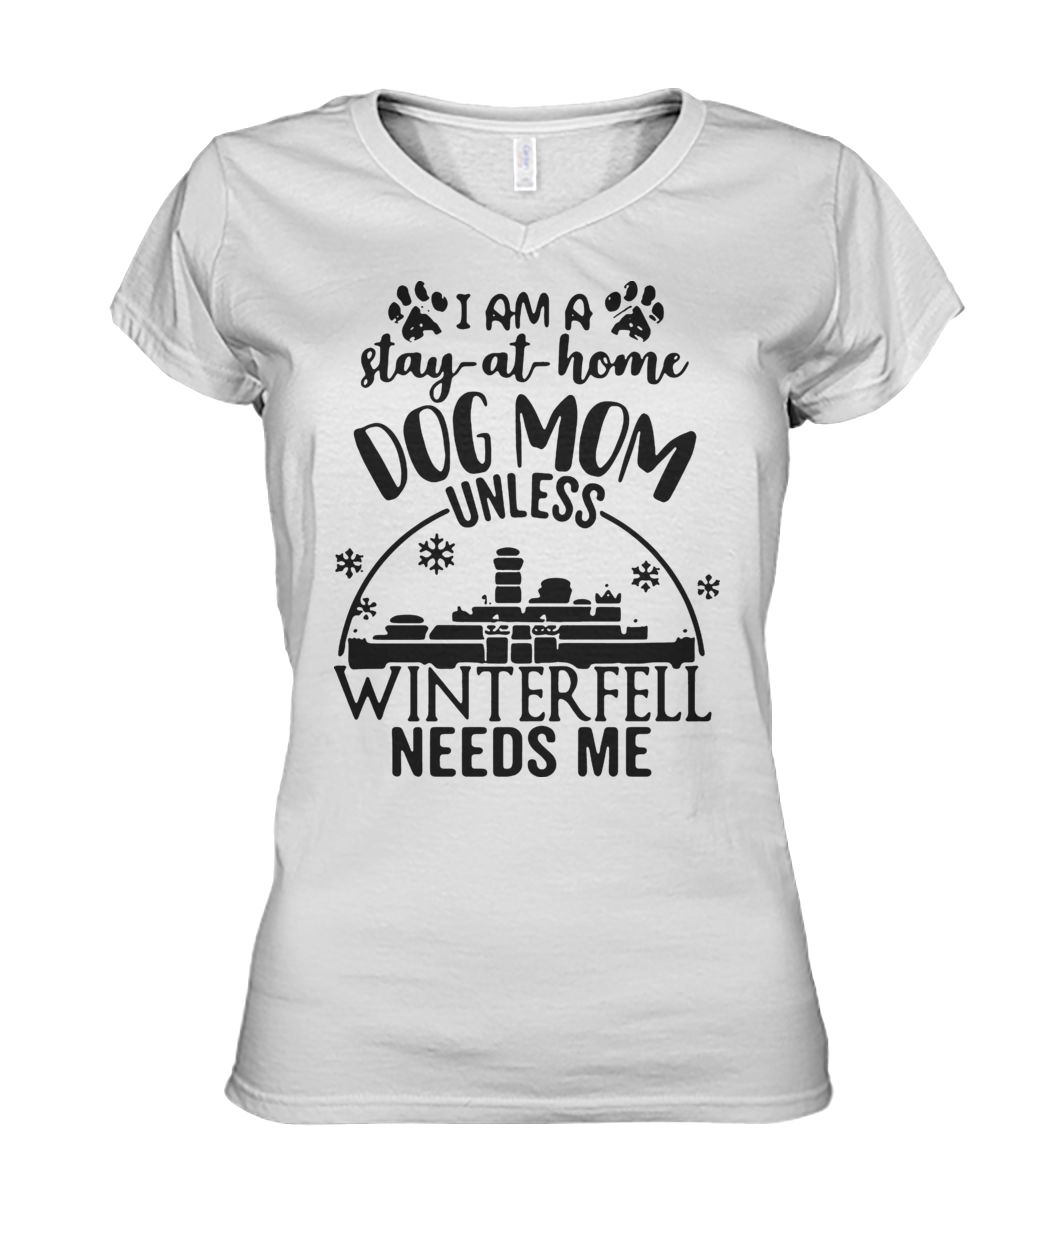 Game of thrones I am a stay-at-home dog mom unless winterfell needs me women's v-neck